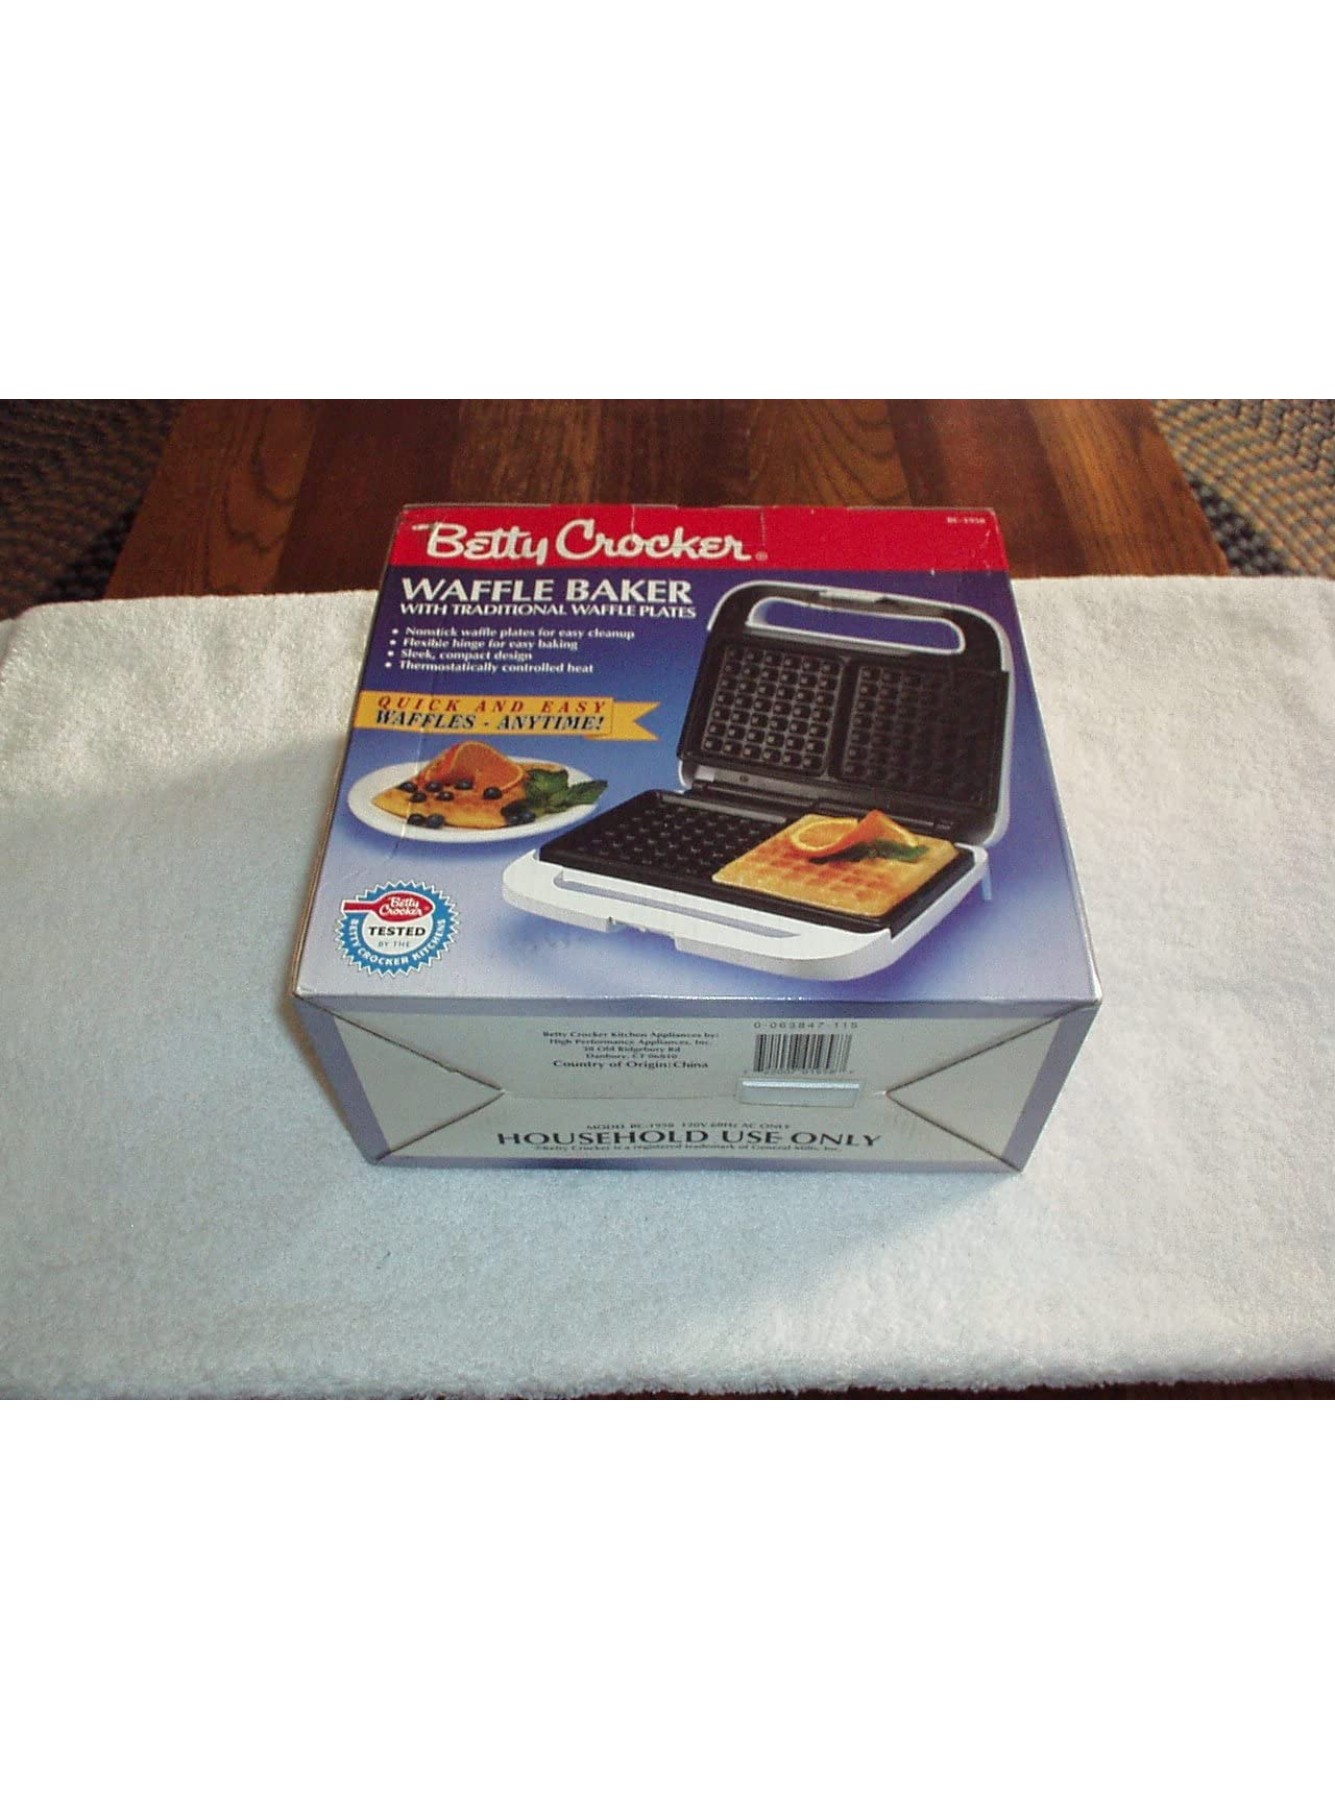 BETTY CROCKER Waffle Baker with Traditional Waffle Plate Indoor GRILL Griddle QUICK EASY & NONSTICK B00TR2DT32